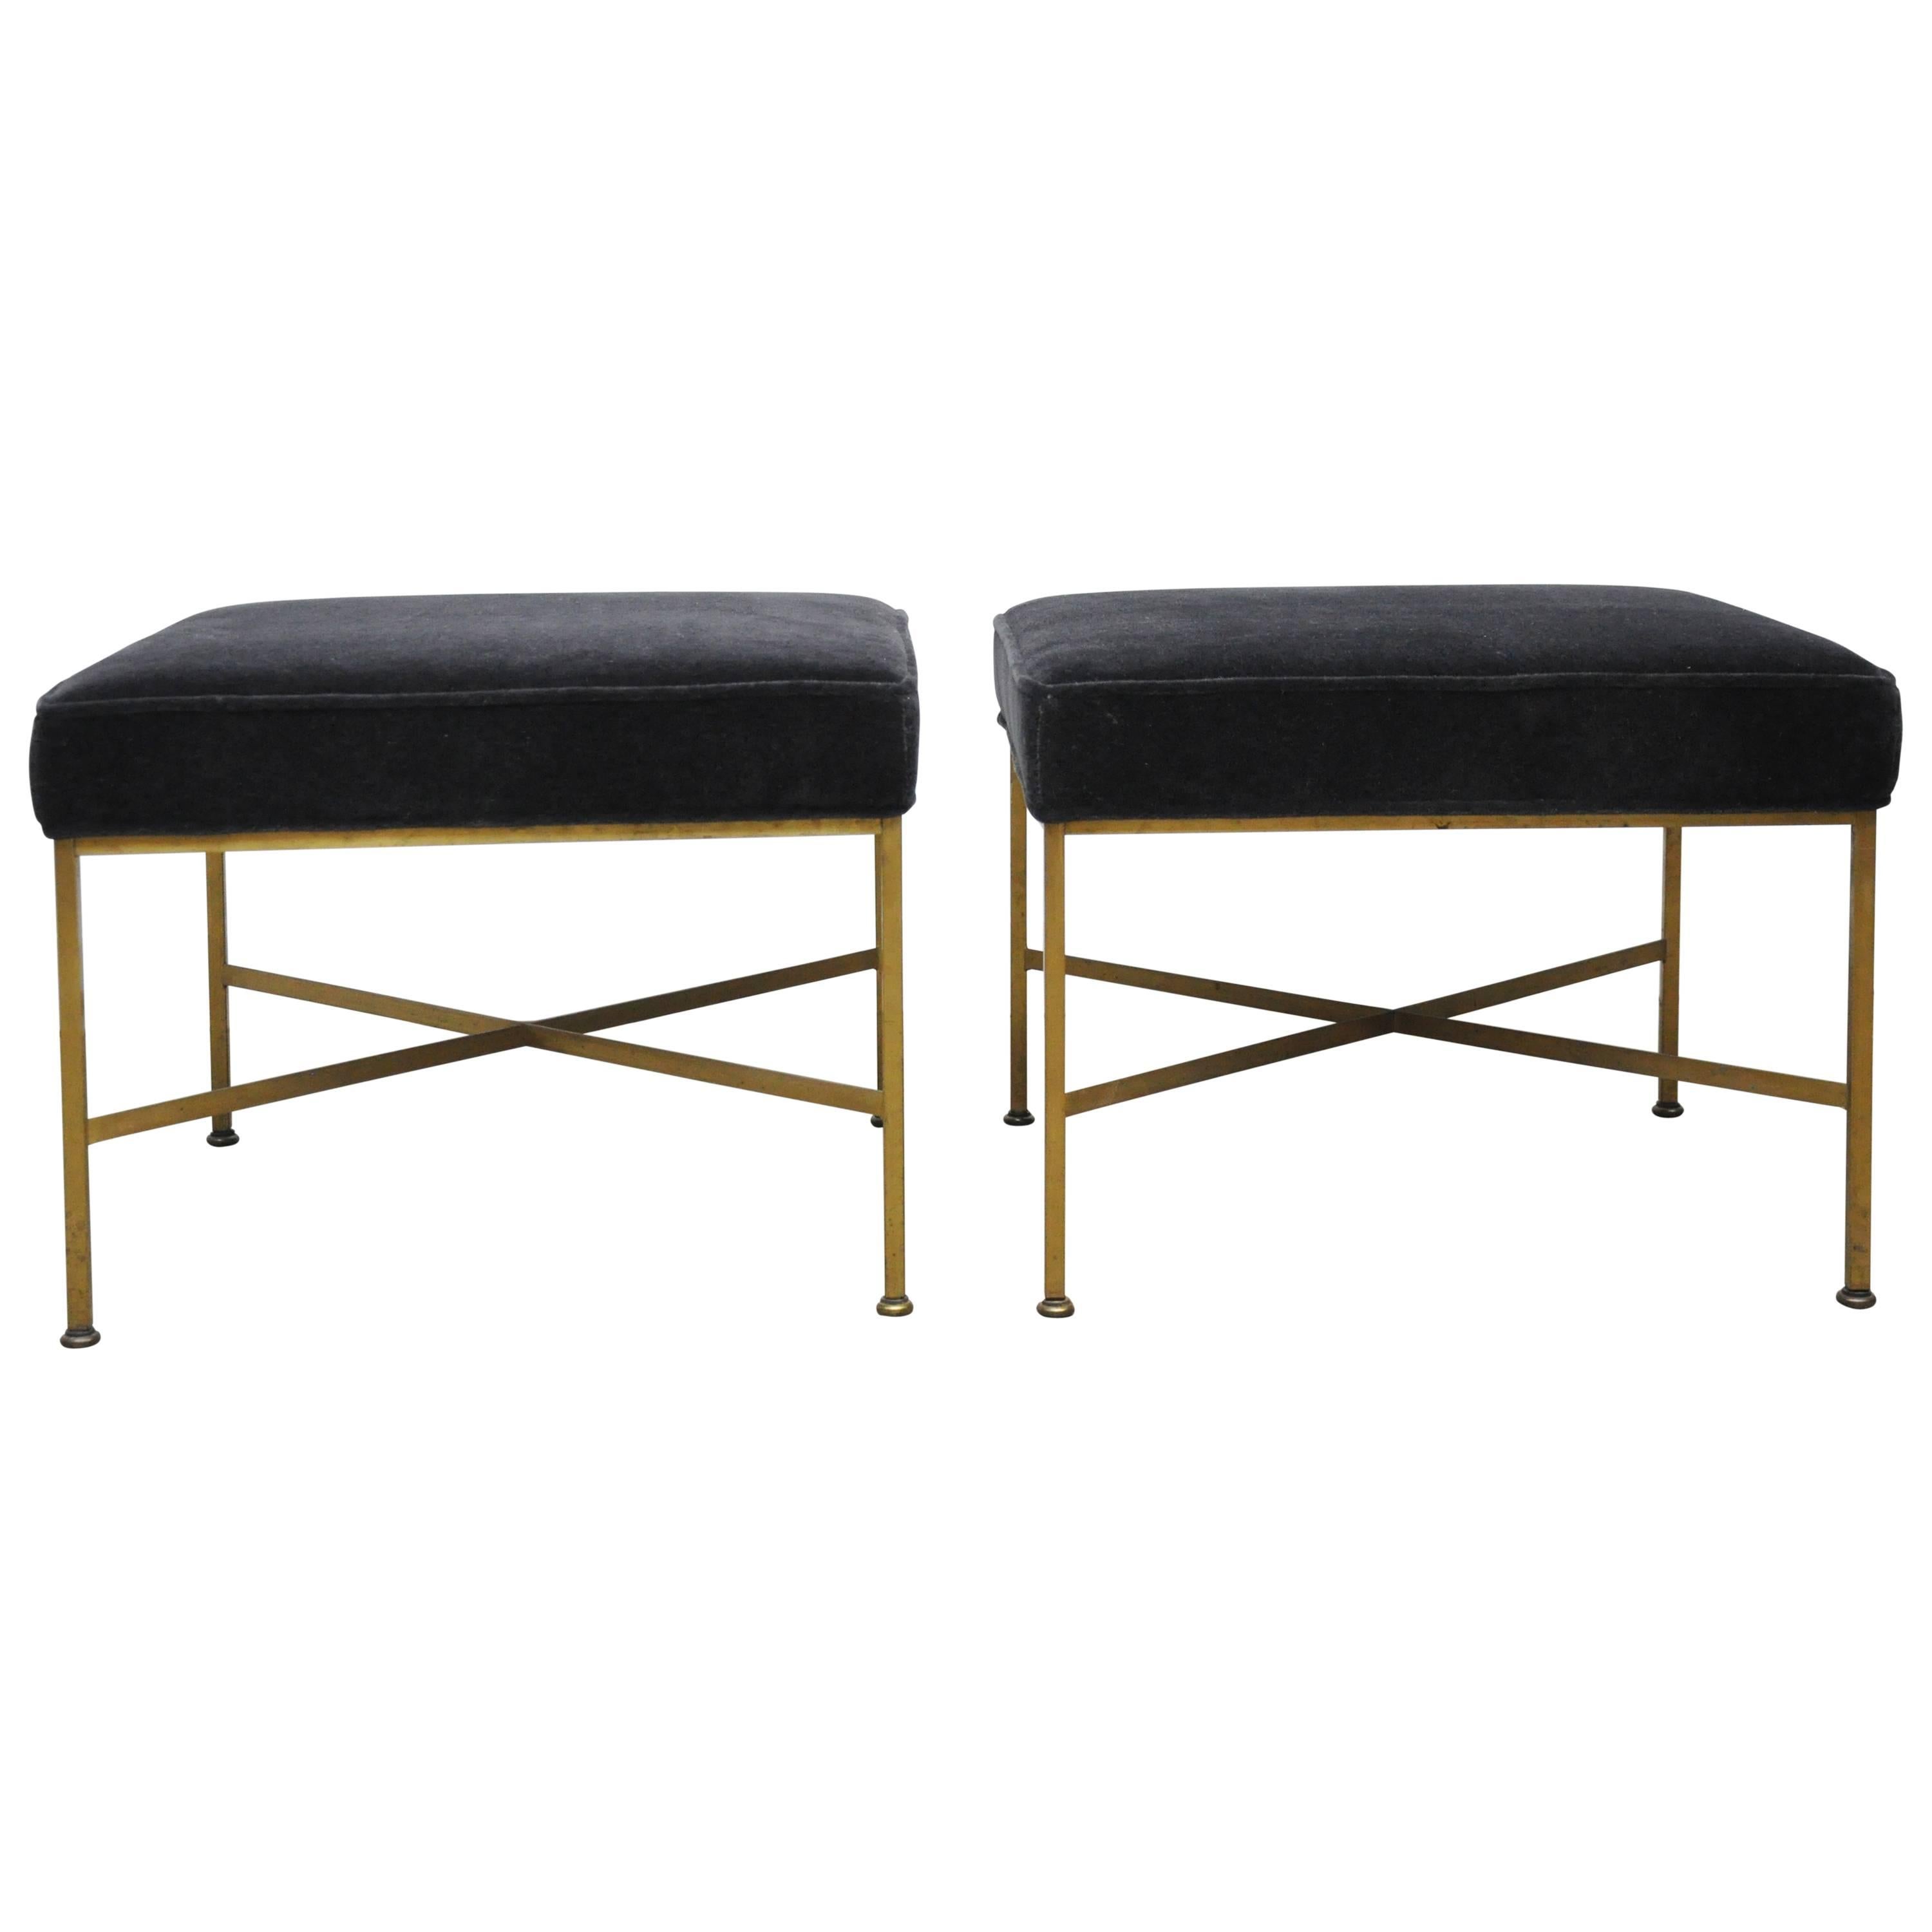 Pair of Brass X-Base Stools by Paul McCobb